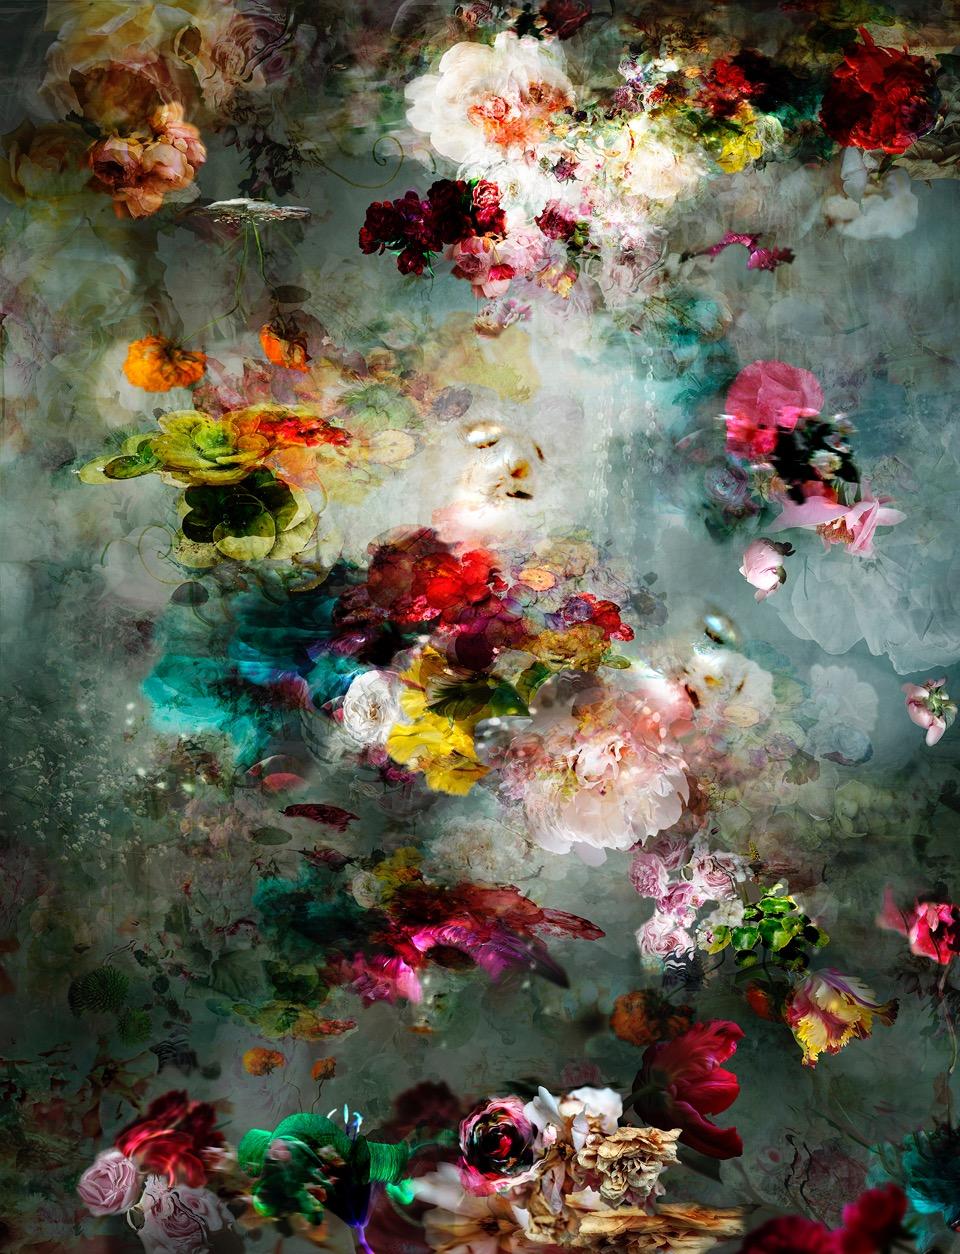 Isabelle Menin Color Photograph - Song for Dead Heroes # 5 vertical colorful abstract floral landscape photo 